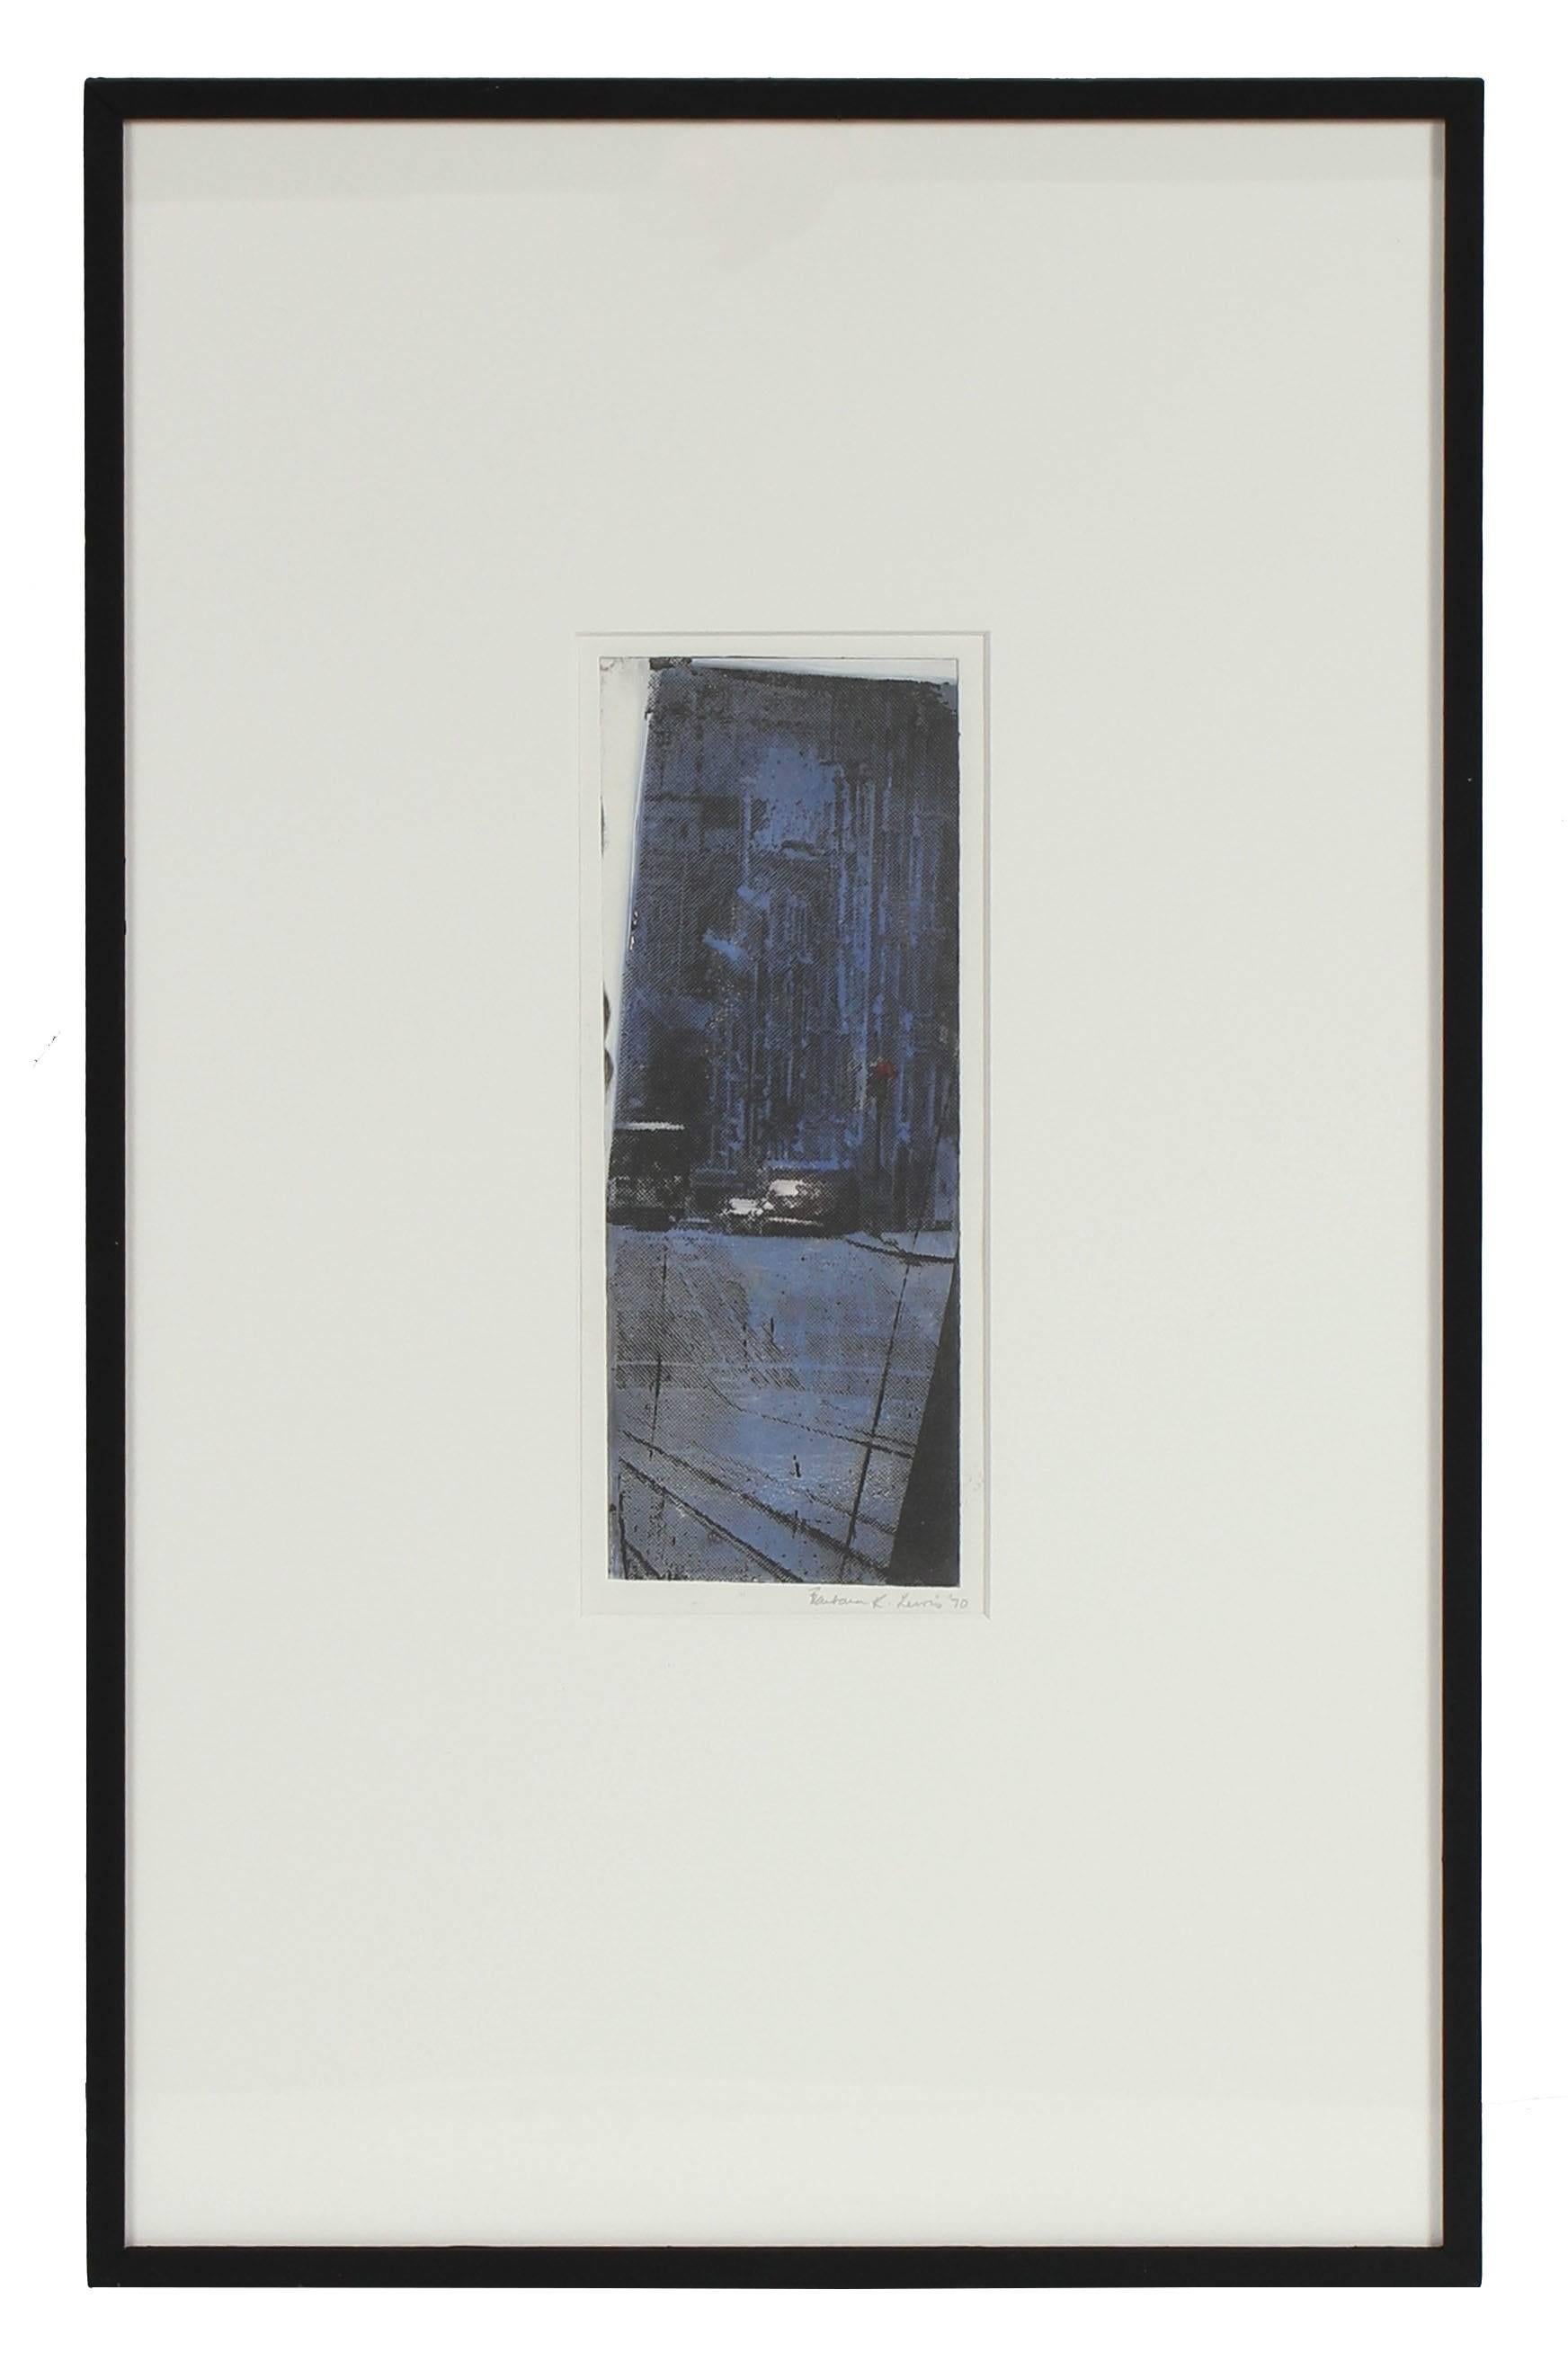 Framed Cityscape Screen Print in Indigo, 1970 - Gray Abstract Print by Barbara Lewis